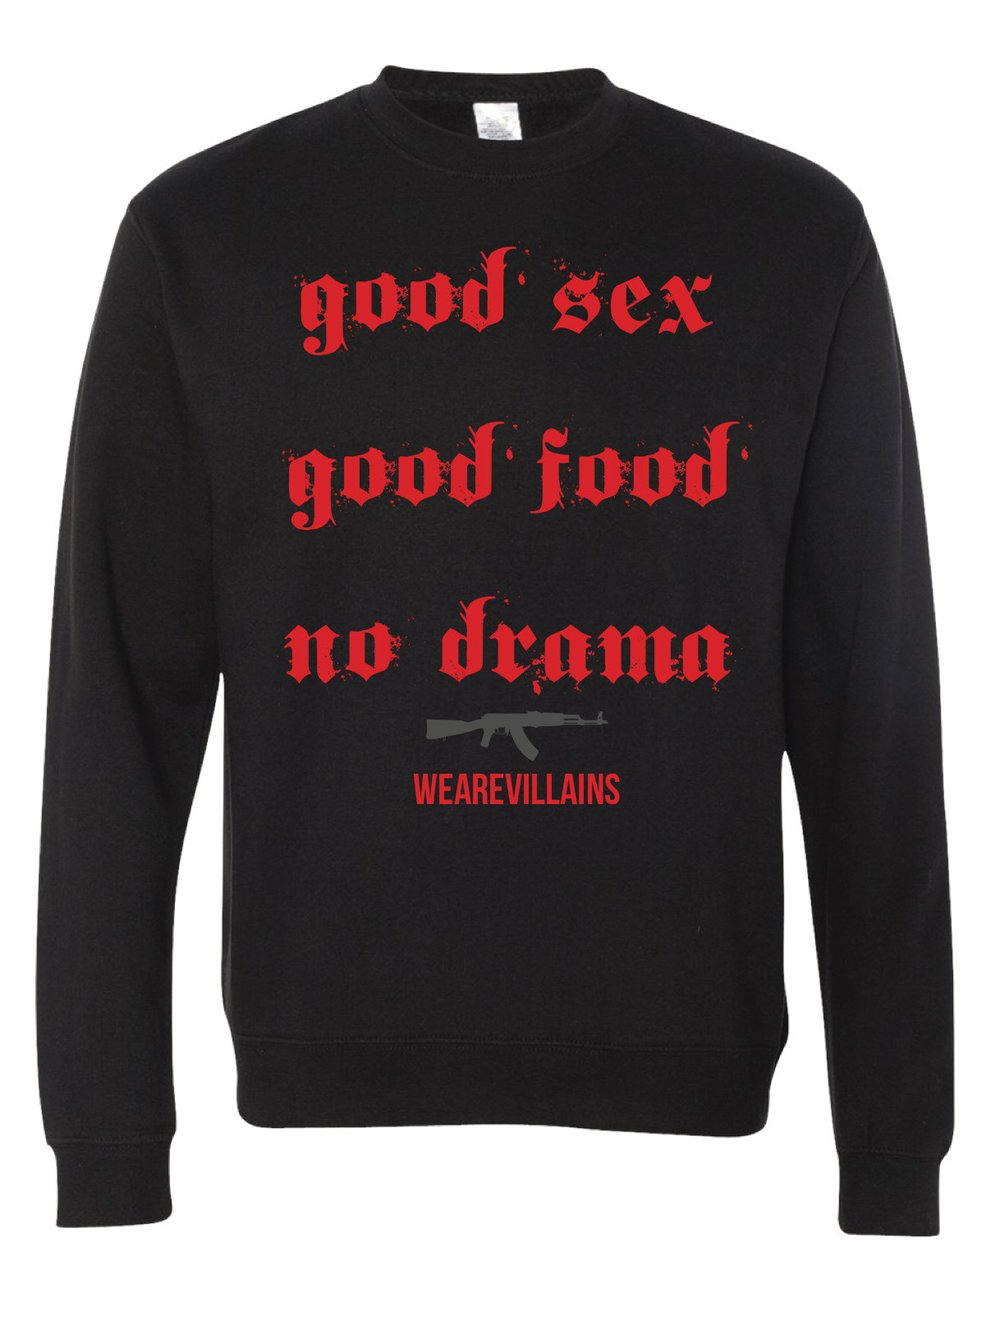 GOOD FOOD GOOD SEX NO DRAMA (limited release)